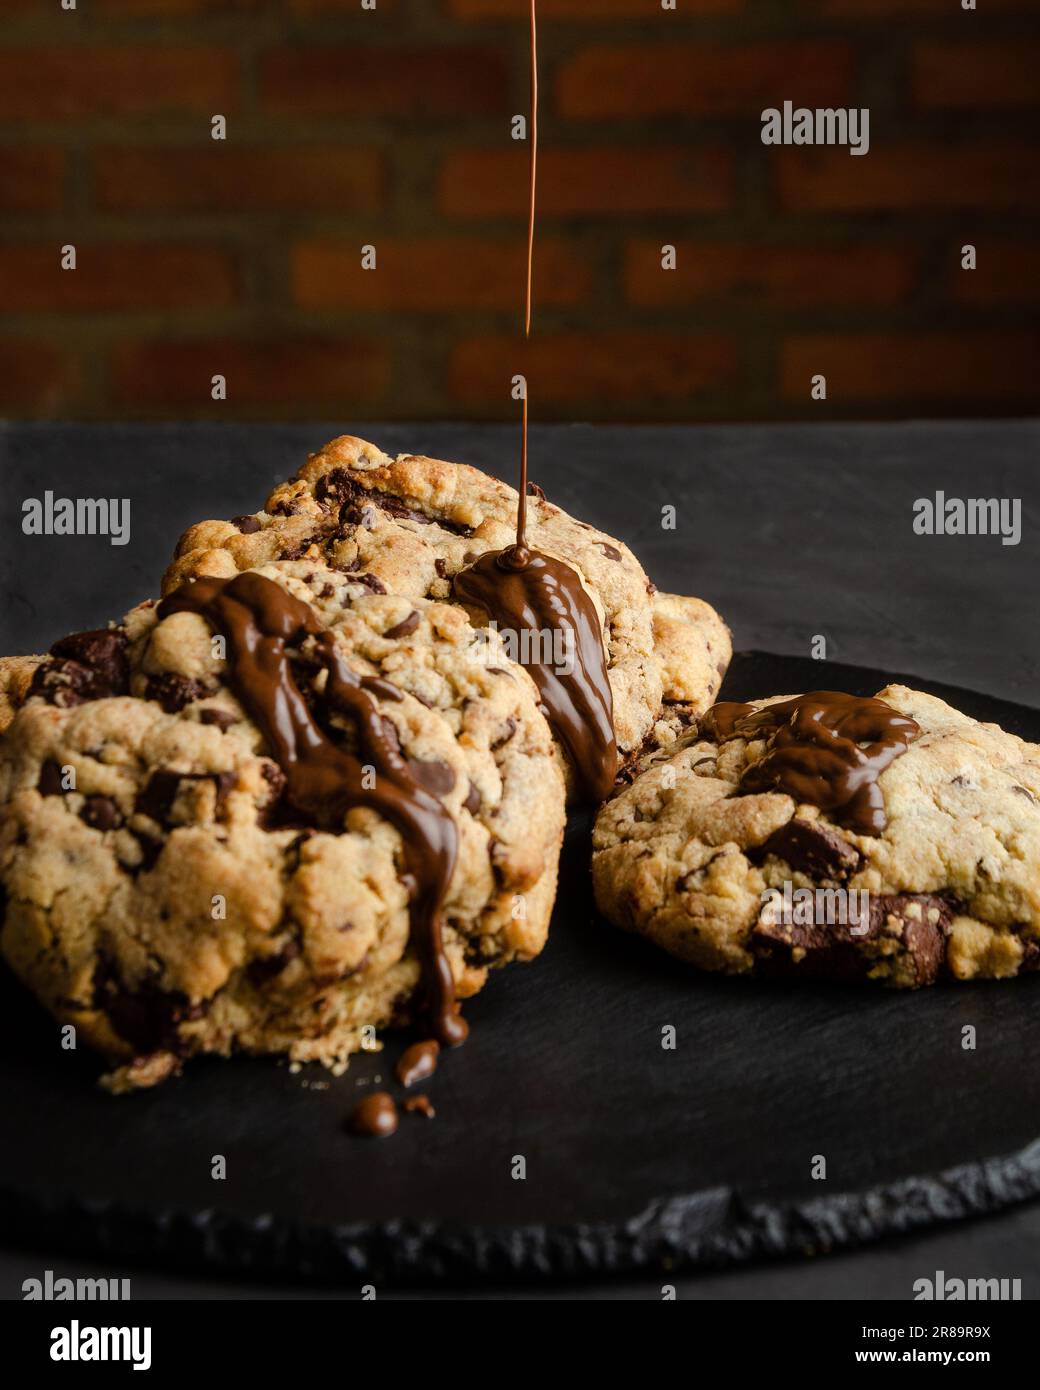 Chocolate chip cookies with chocolate syrup, on black background and brick wall Stock Photo